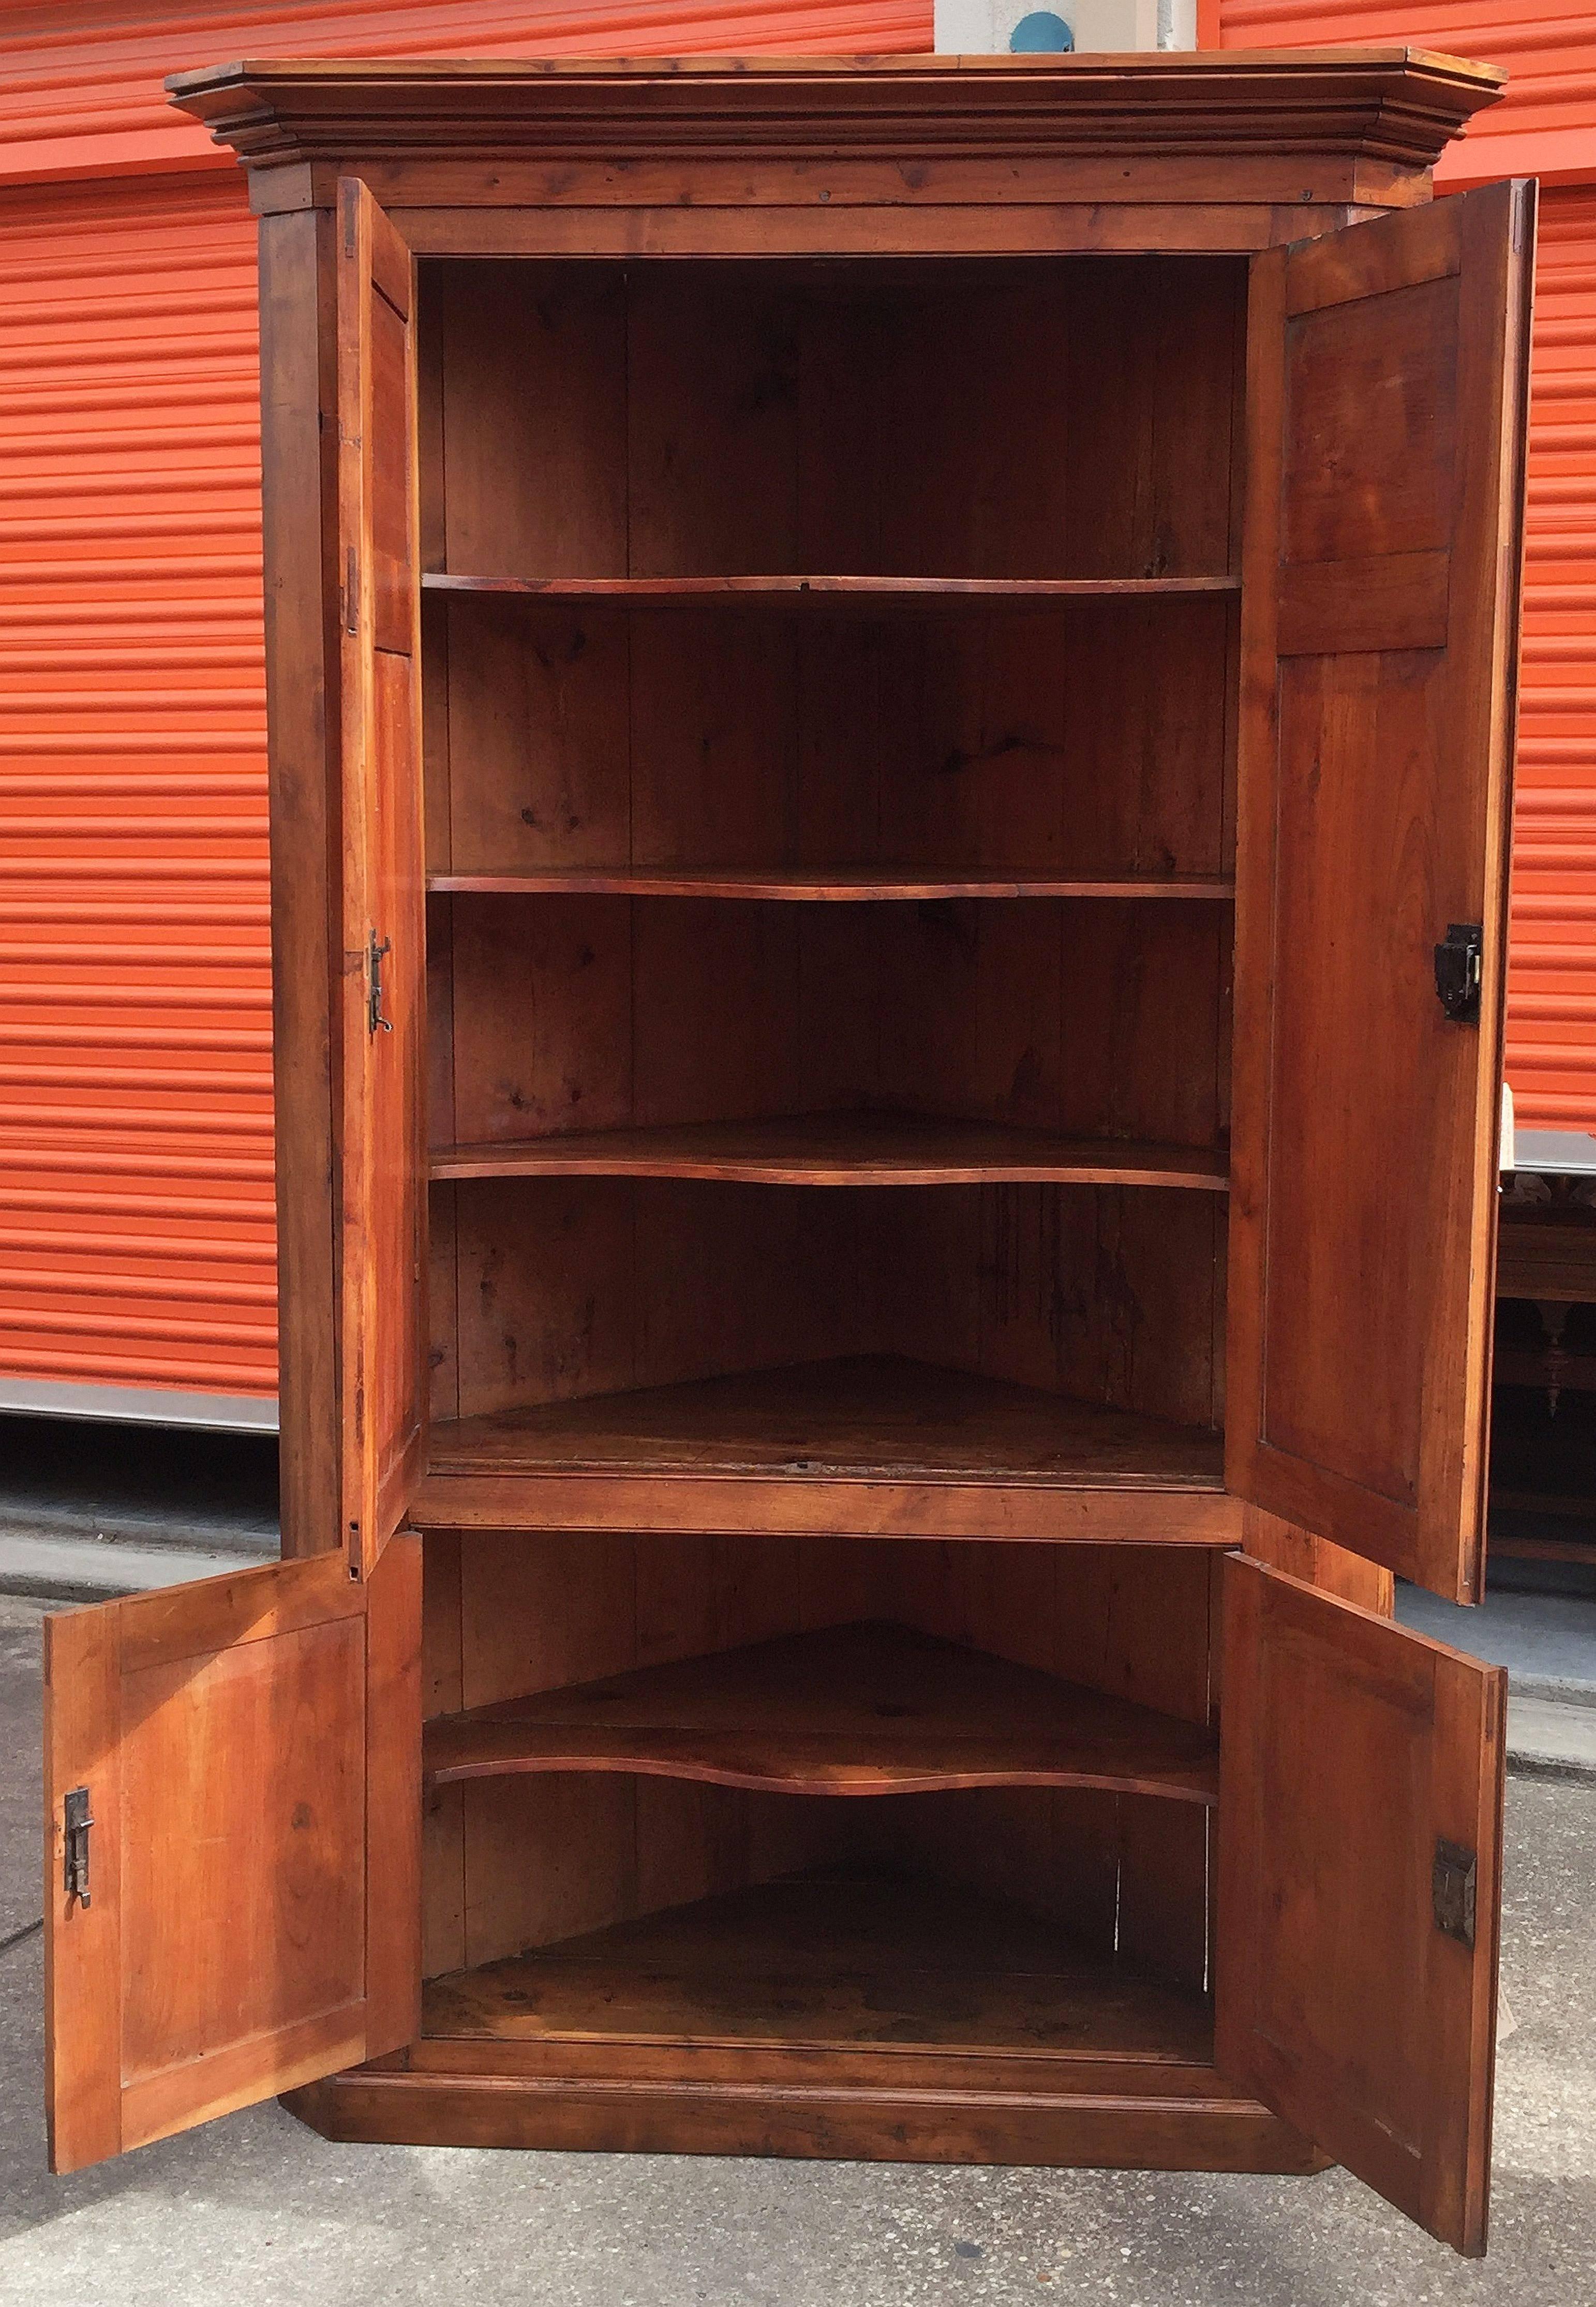 19th Century Large Two-Tiered Corner Cabinet or Cupboard of Cherry with Paneled Doors For Sale